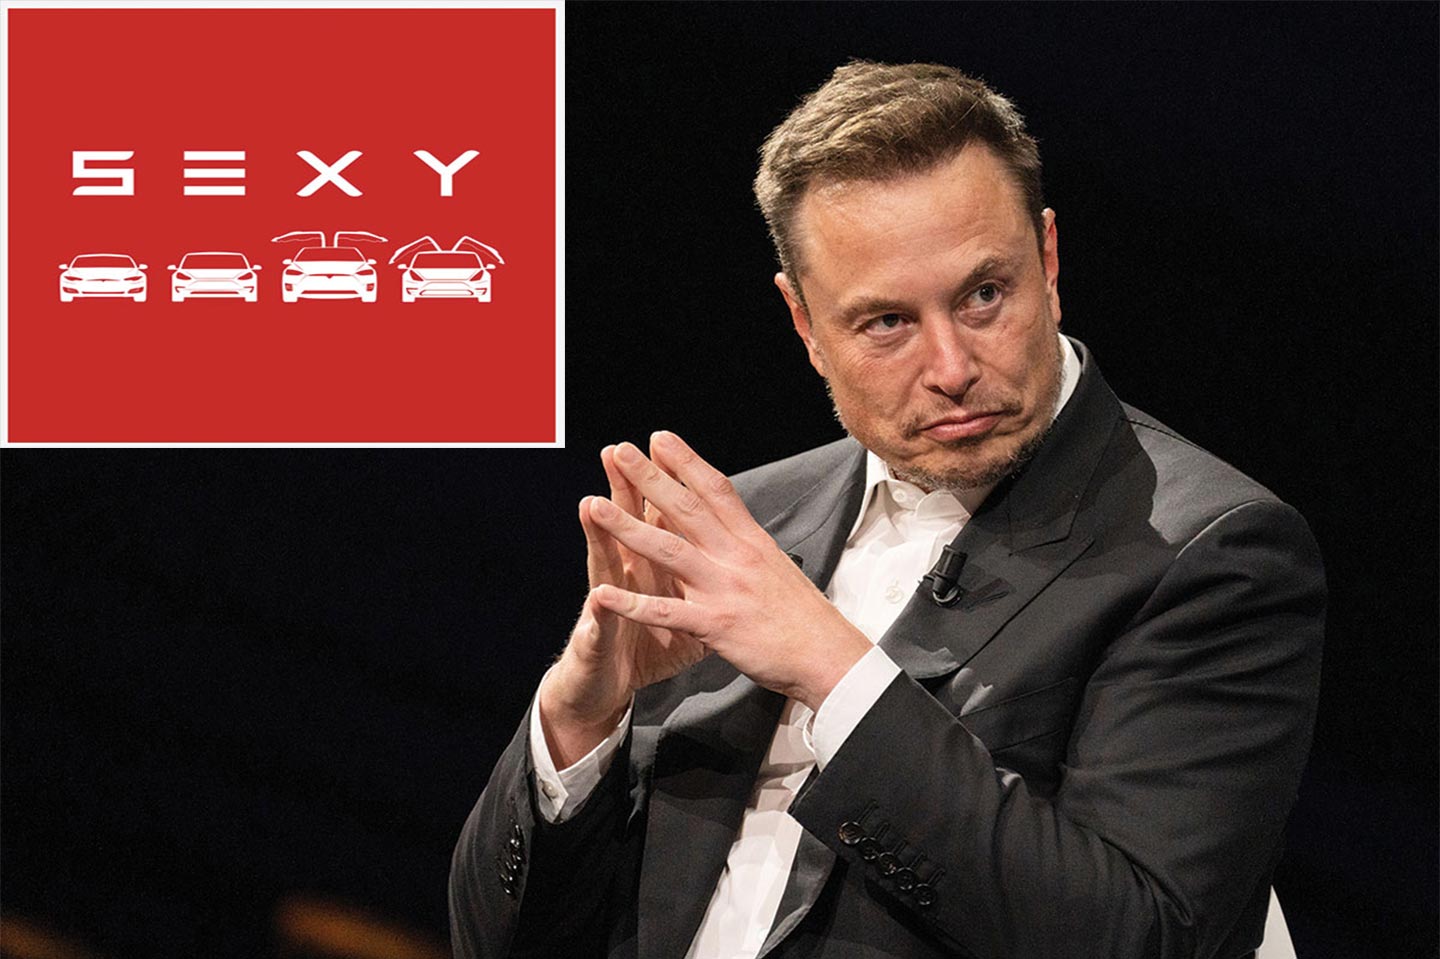 Elon Musk is known for closely monitoring his company’s factories and for opposing safety reforms. At left, the names of four Tesla car models spell out “S3XY.”